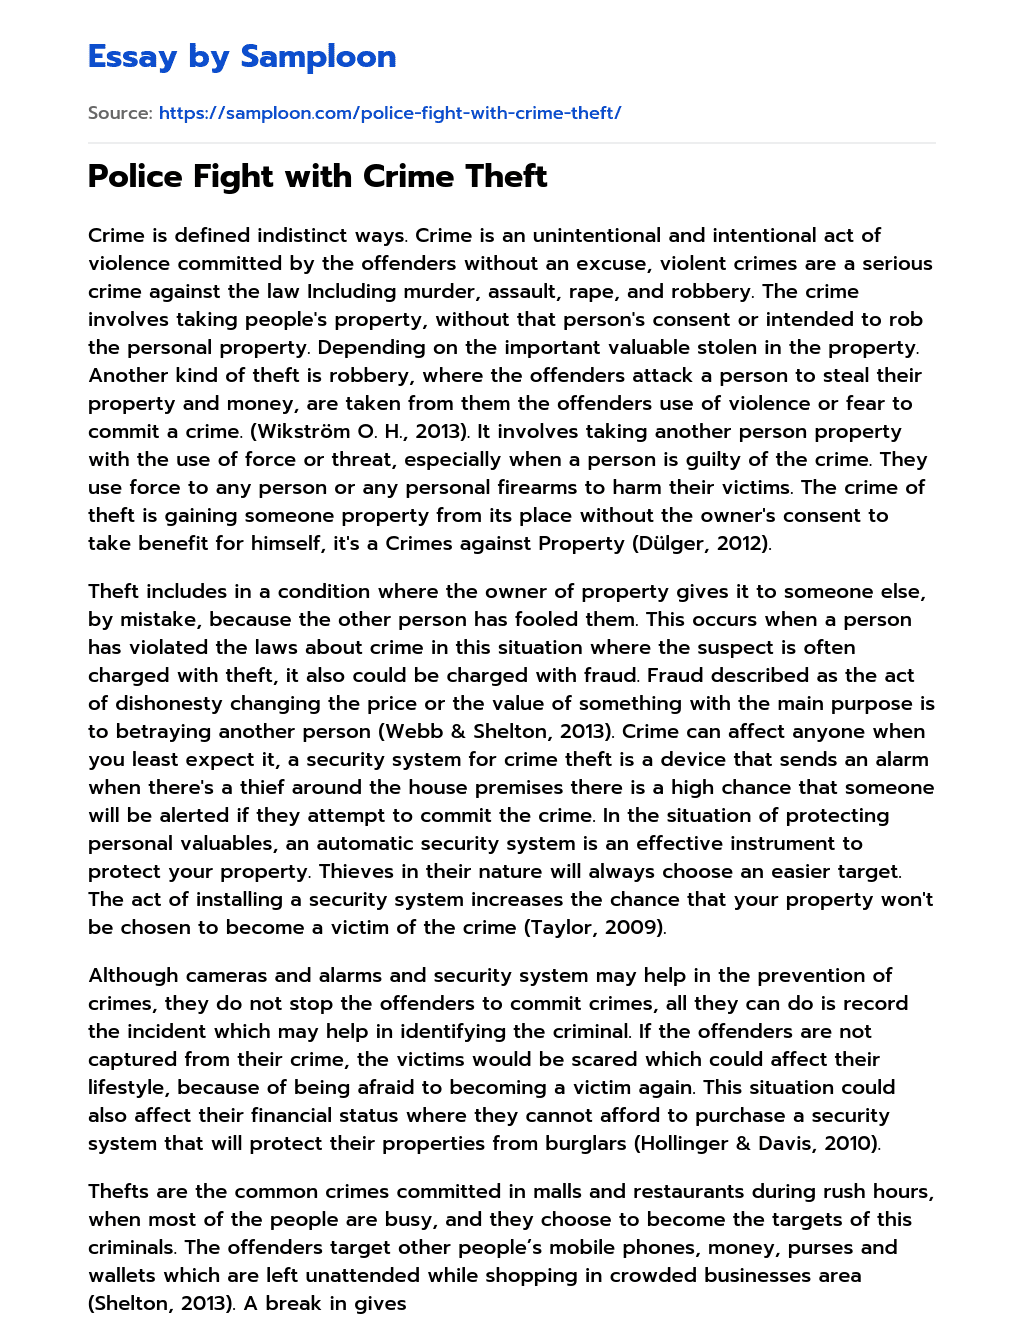 Police Fight with Crime Theft essay